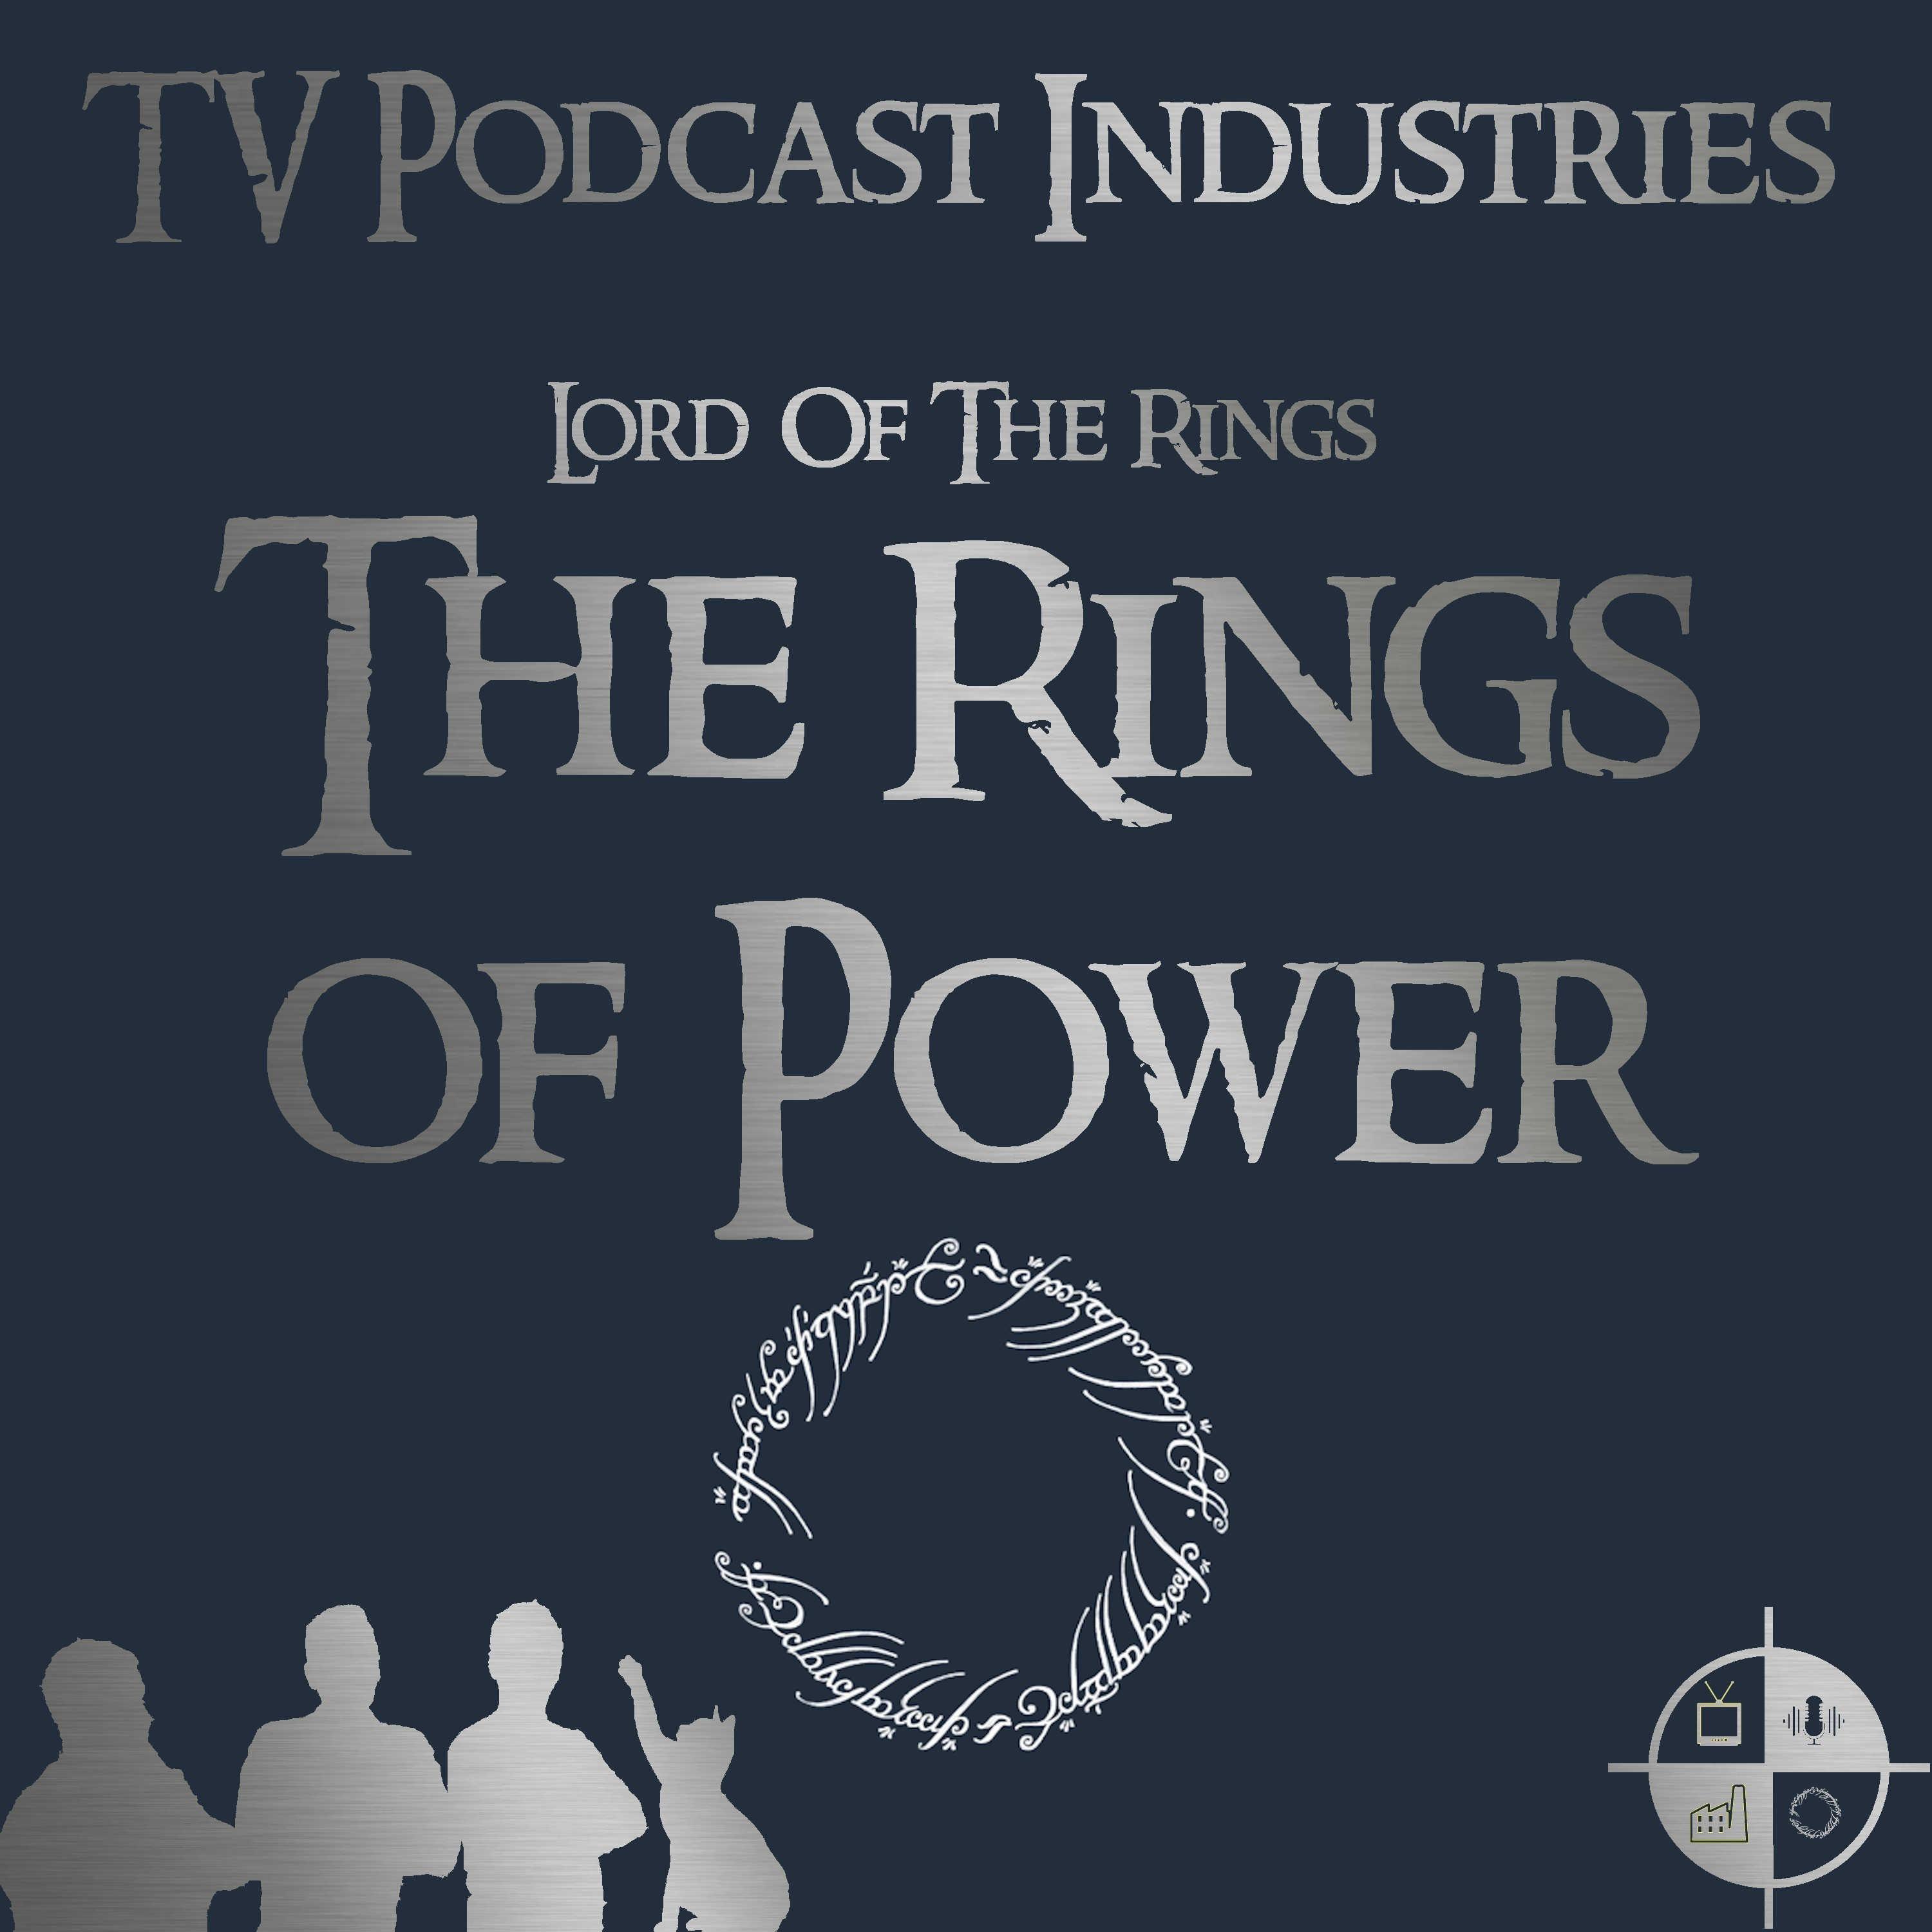 The Rings of Power Podcast from TV Podcast Industries